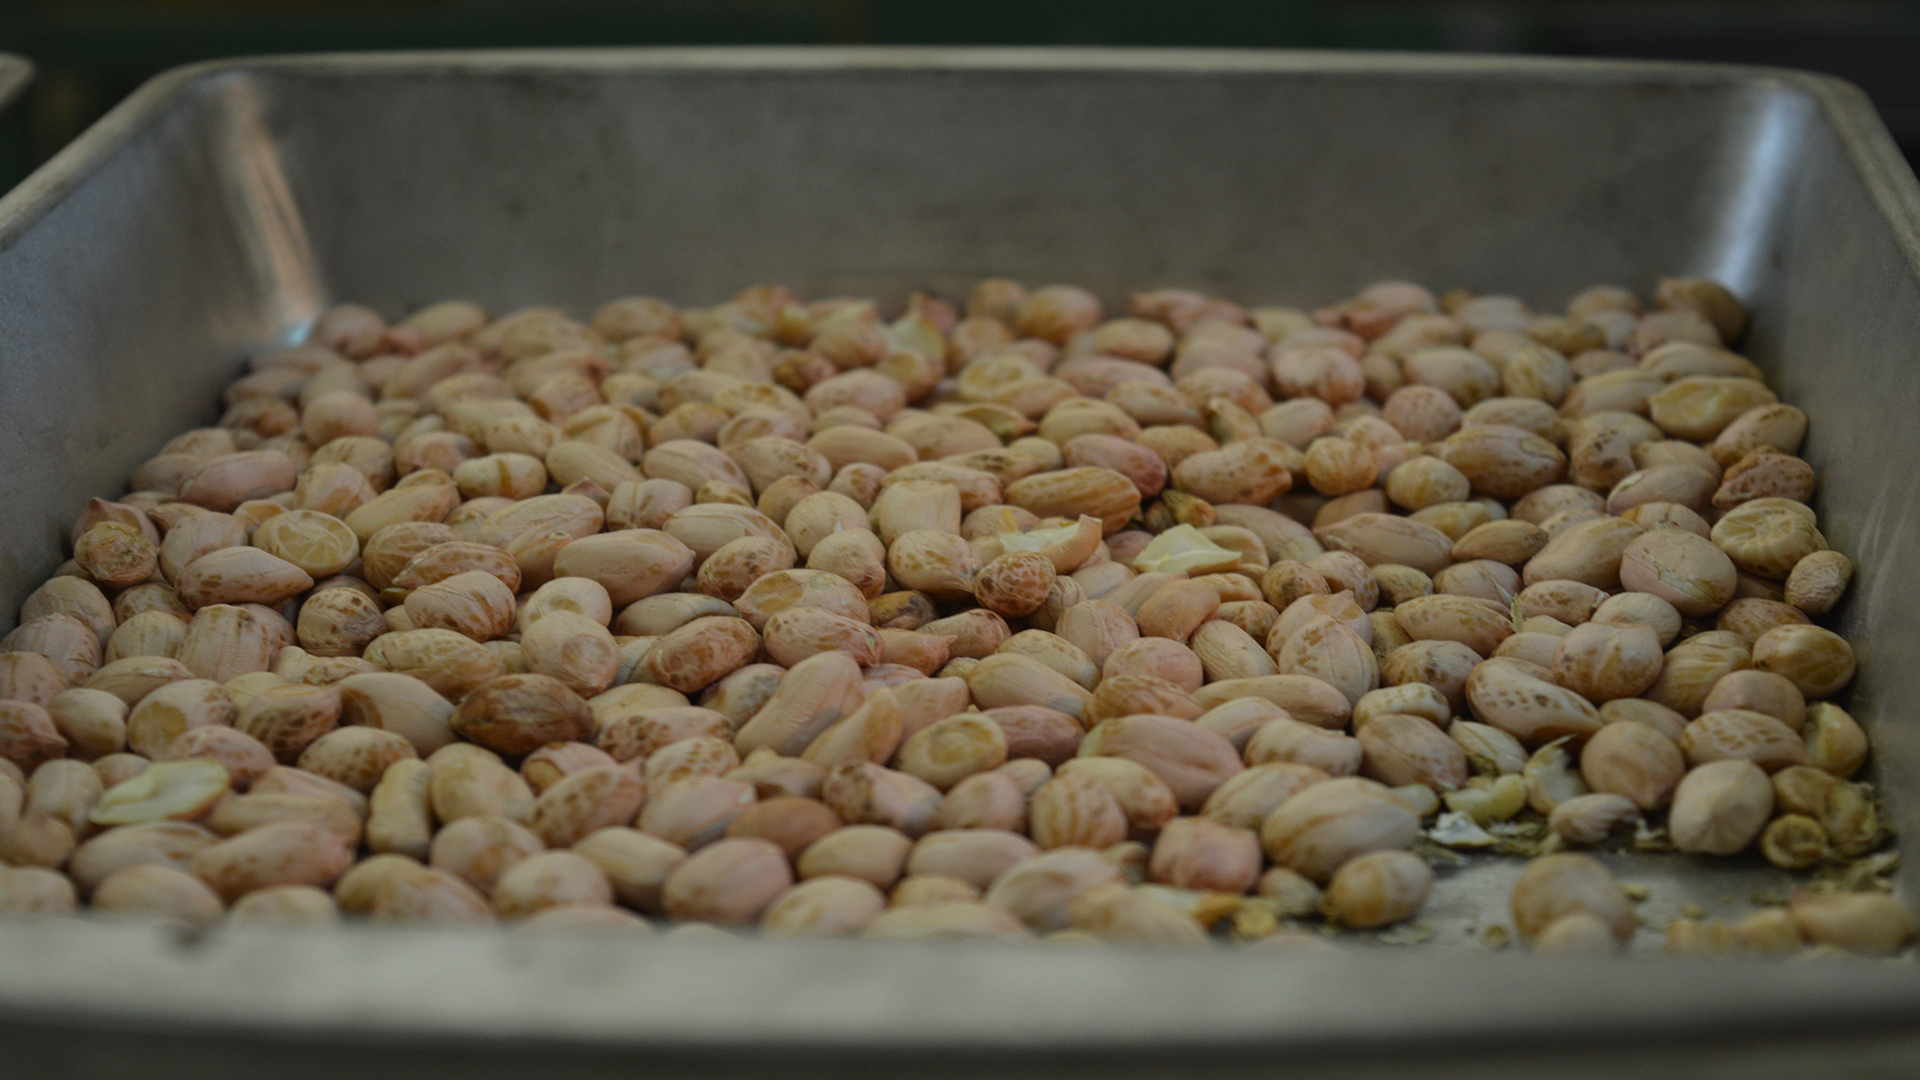 Alabama Peanut Check-off Wins 95% Approval in Referendum